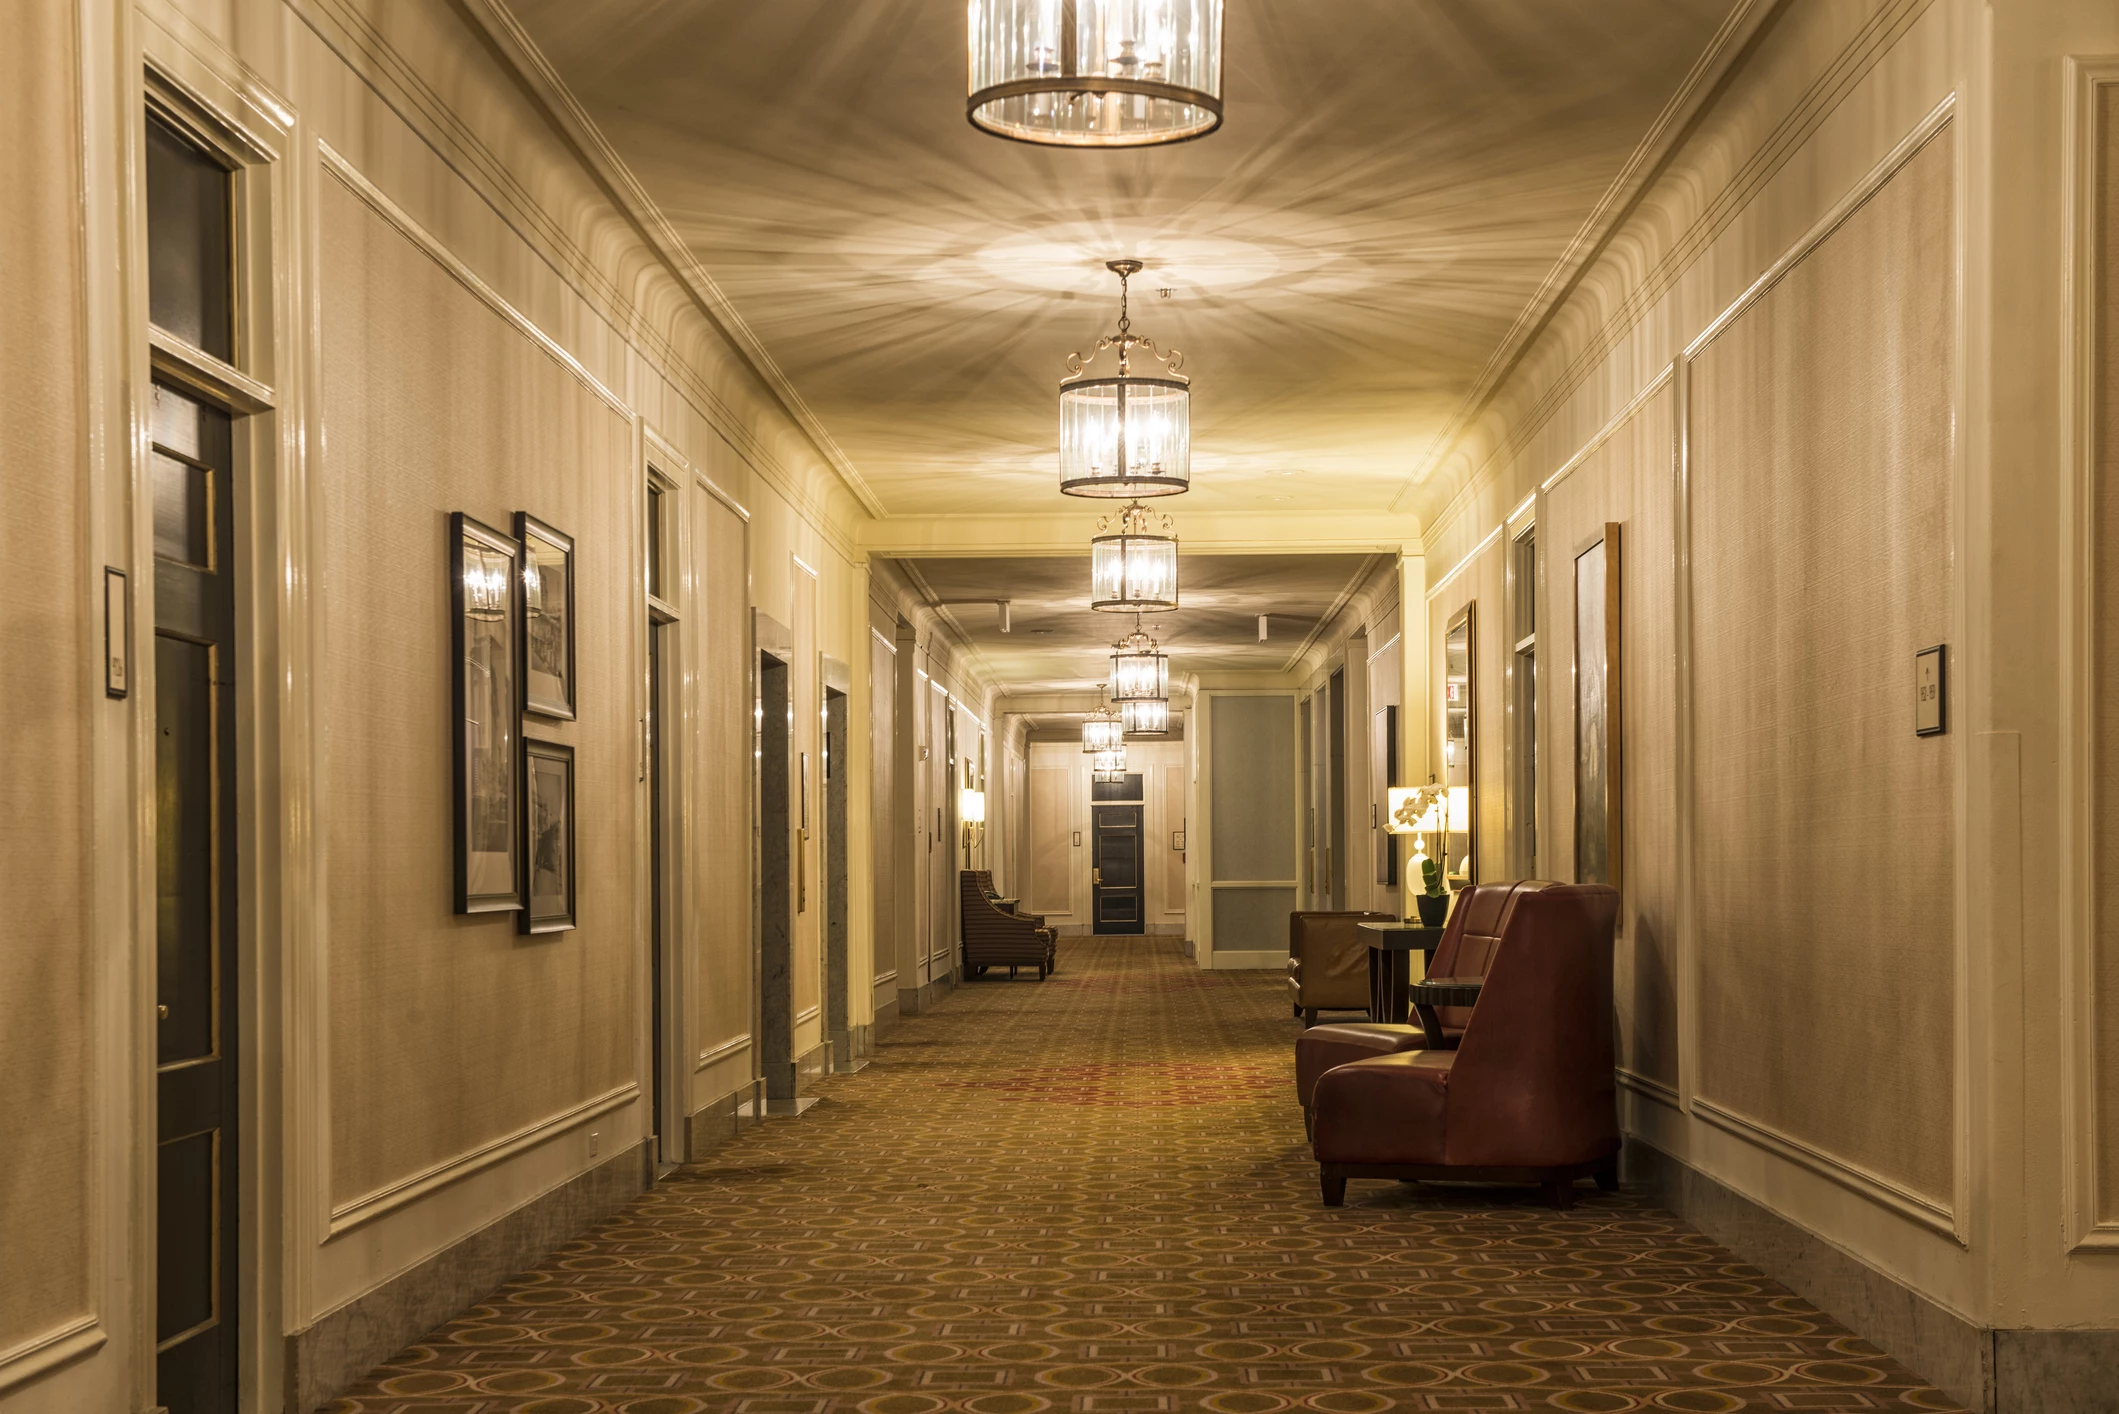 These are the 9 Most Haunted Hotels in Minnesota